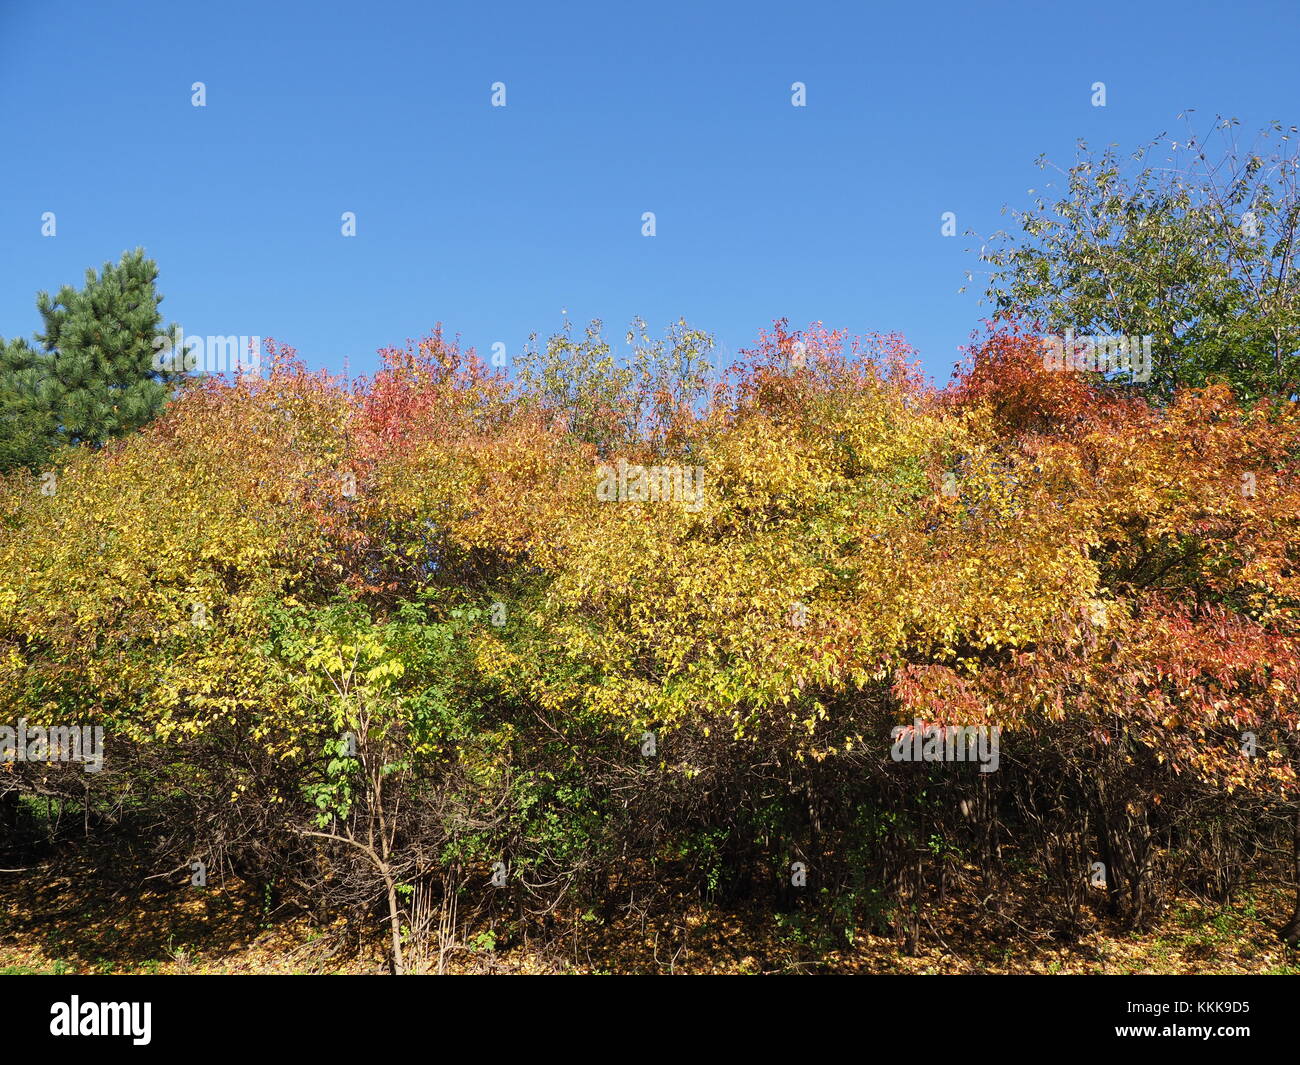 Colorful plants and trees in forest at Moravian-Silesian Beskids mountains in Czech Republic with clear blue sky in 2017 warm sunny autumn day, Europe Stock Photo